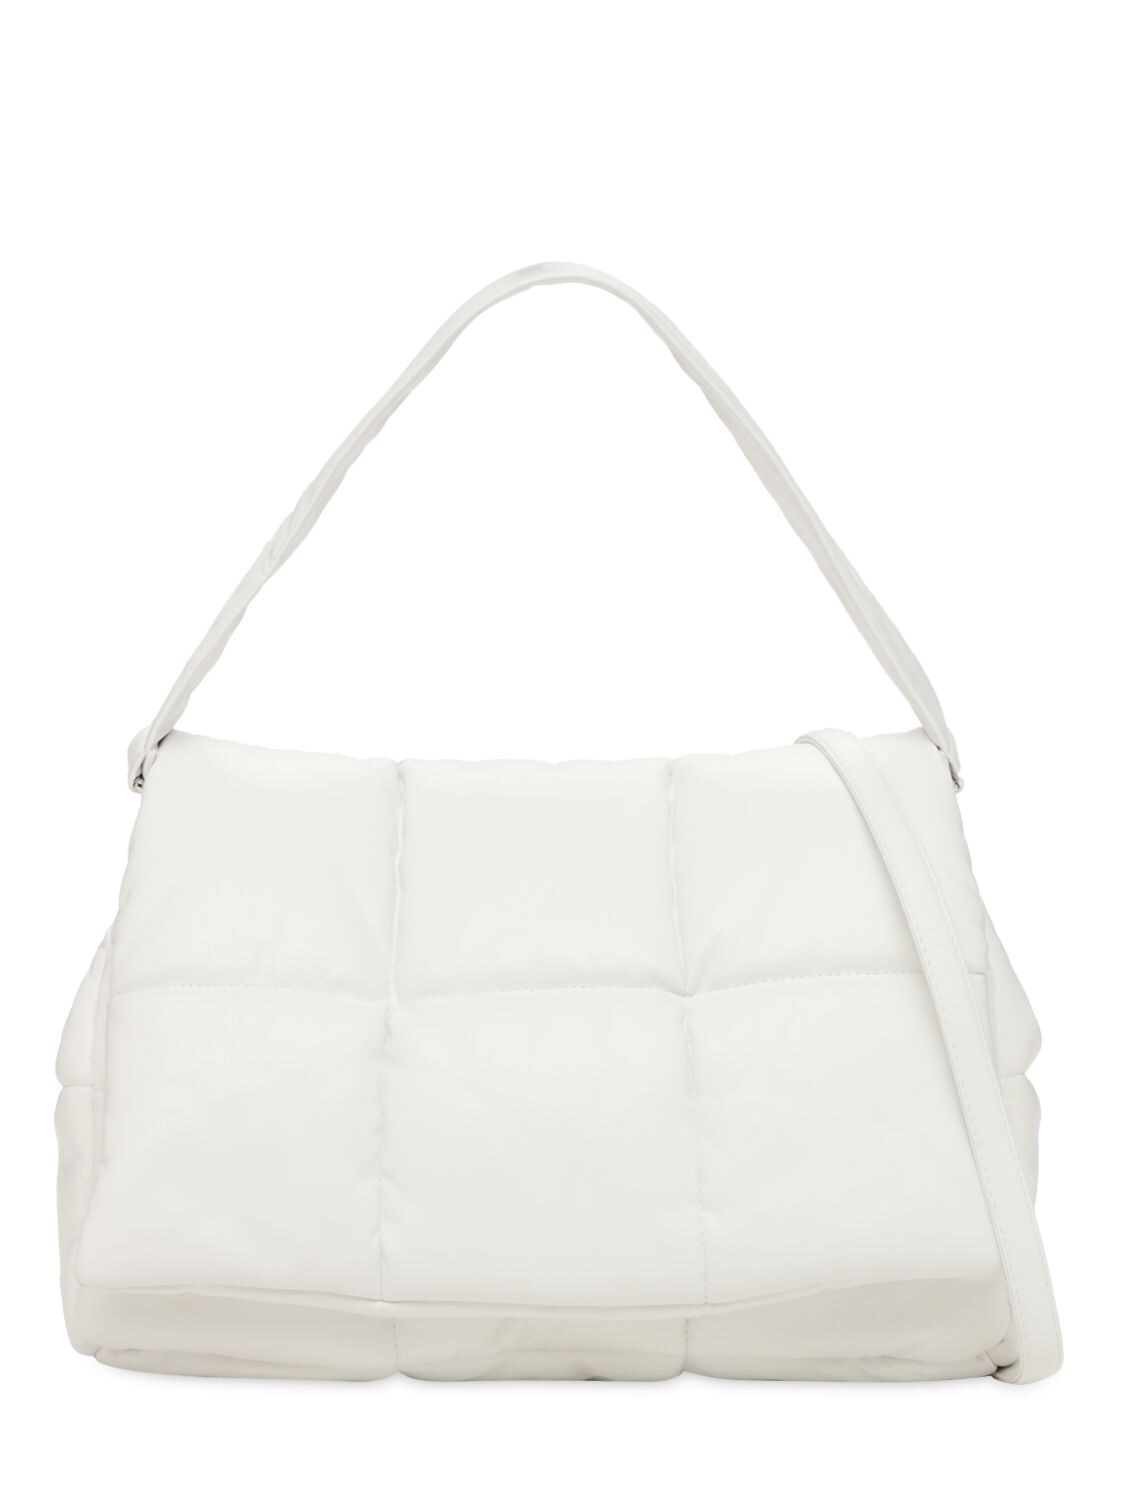 Stand Studio Wanda Quilted Leather Bag In White